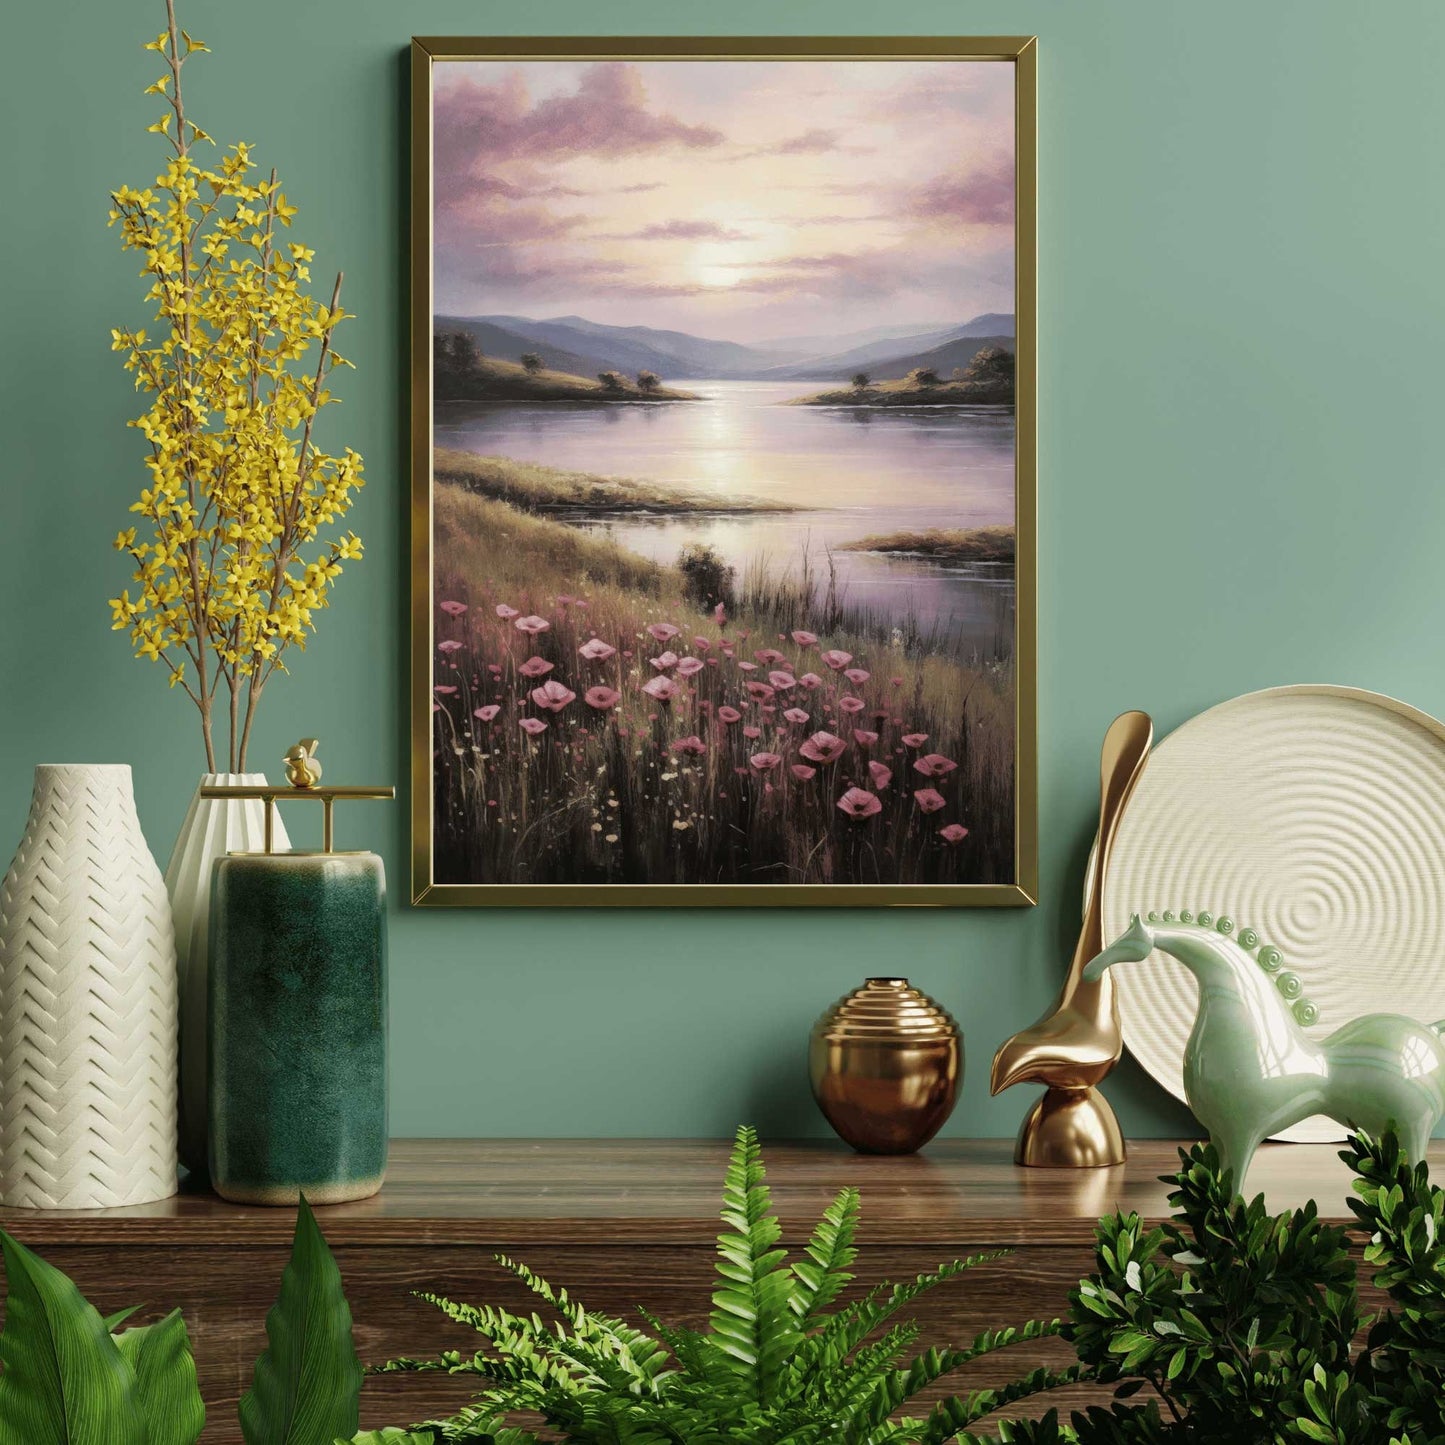 Floral & Mountain Majesty - Ultimate Digital Art for Nature Lovers: Versatile Sizes, Instant Download!